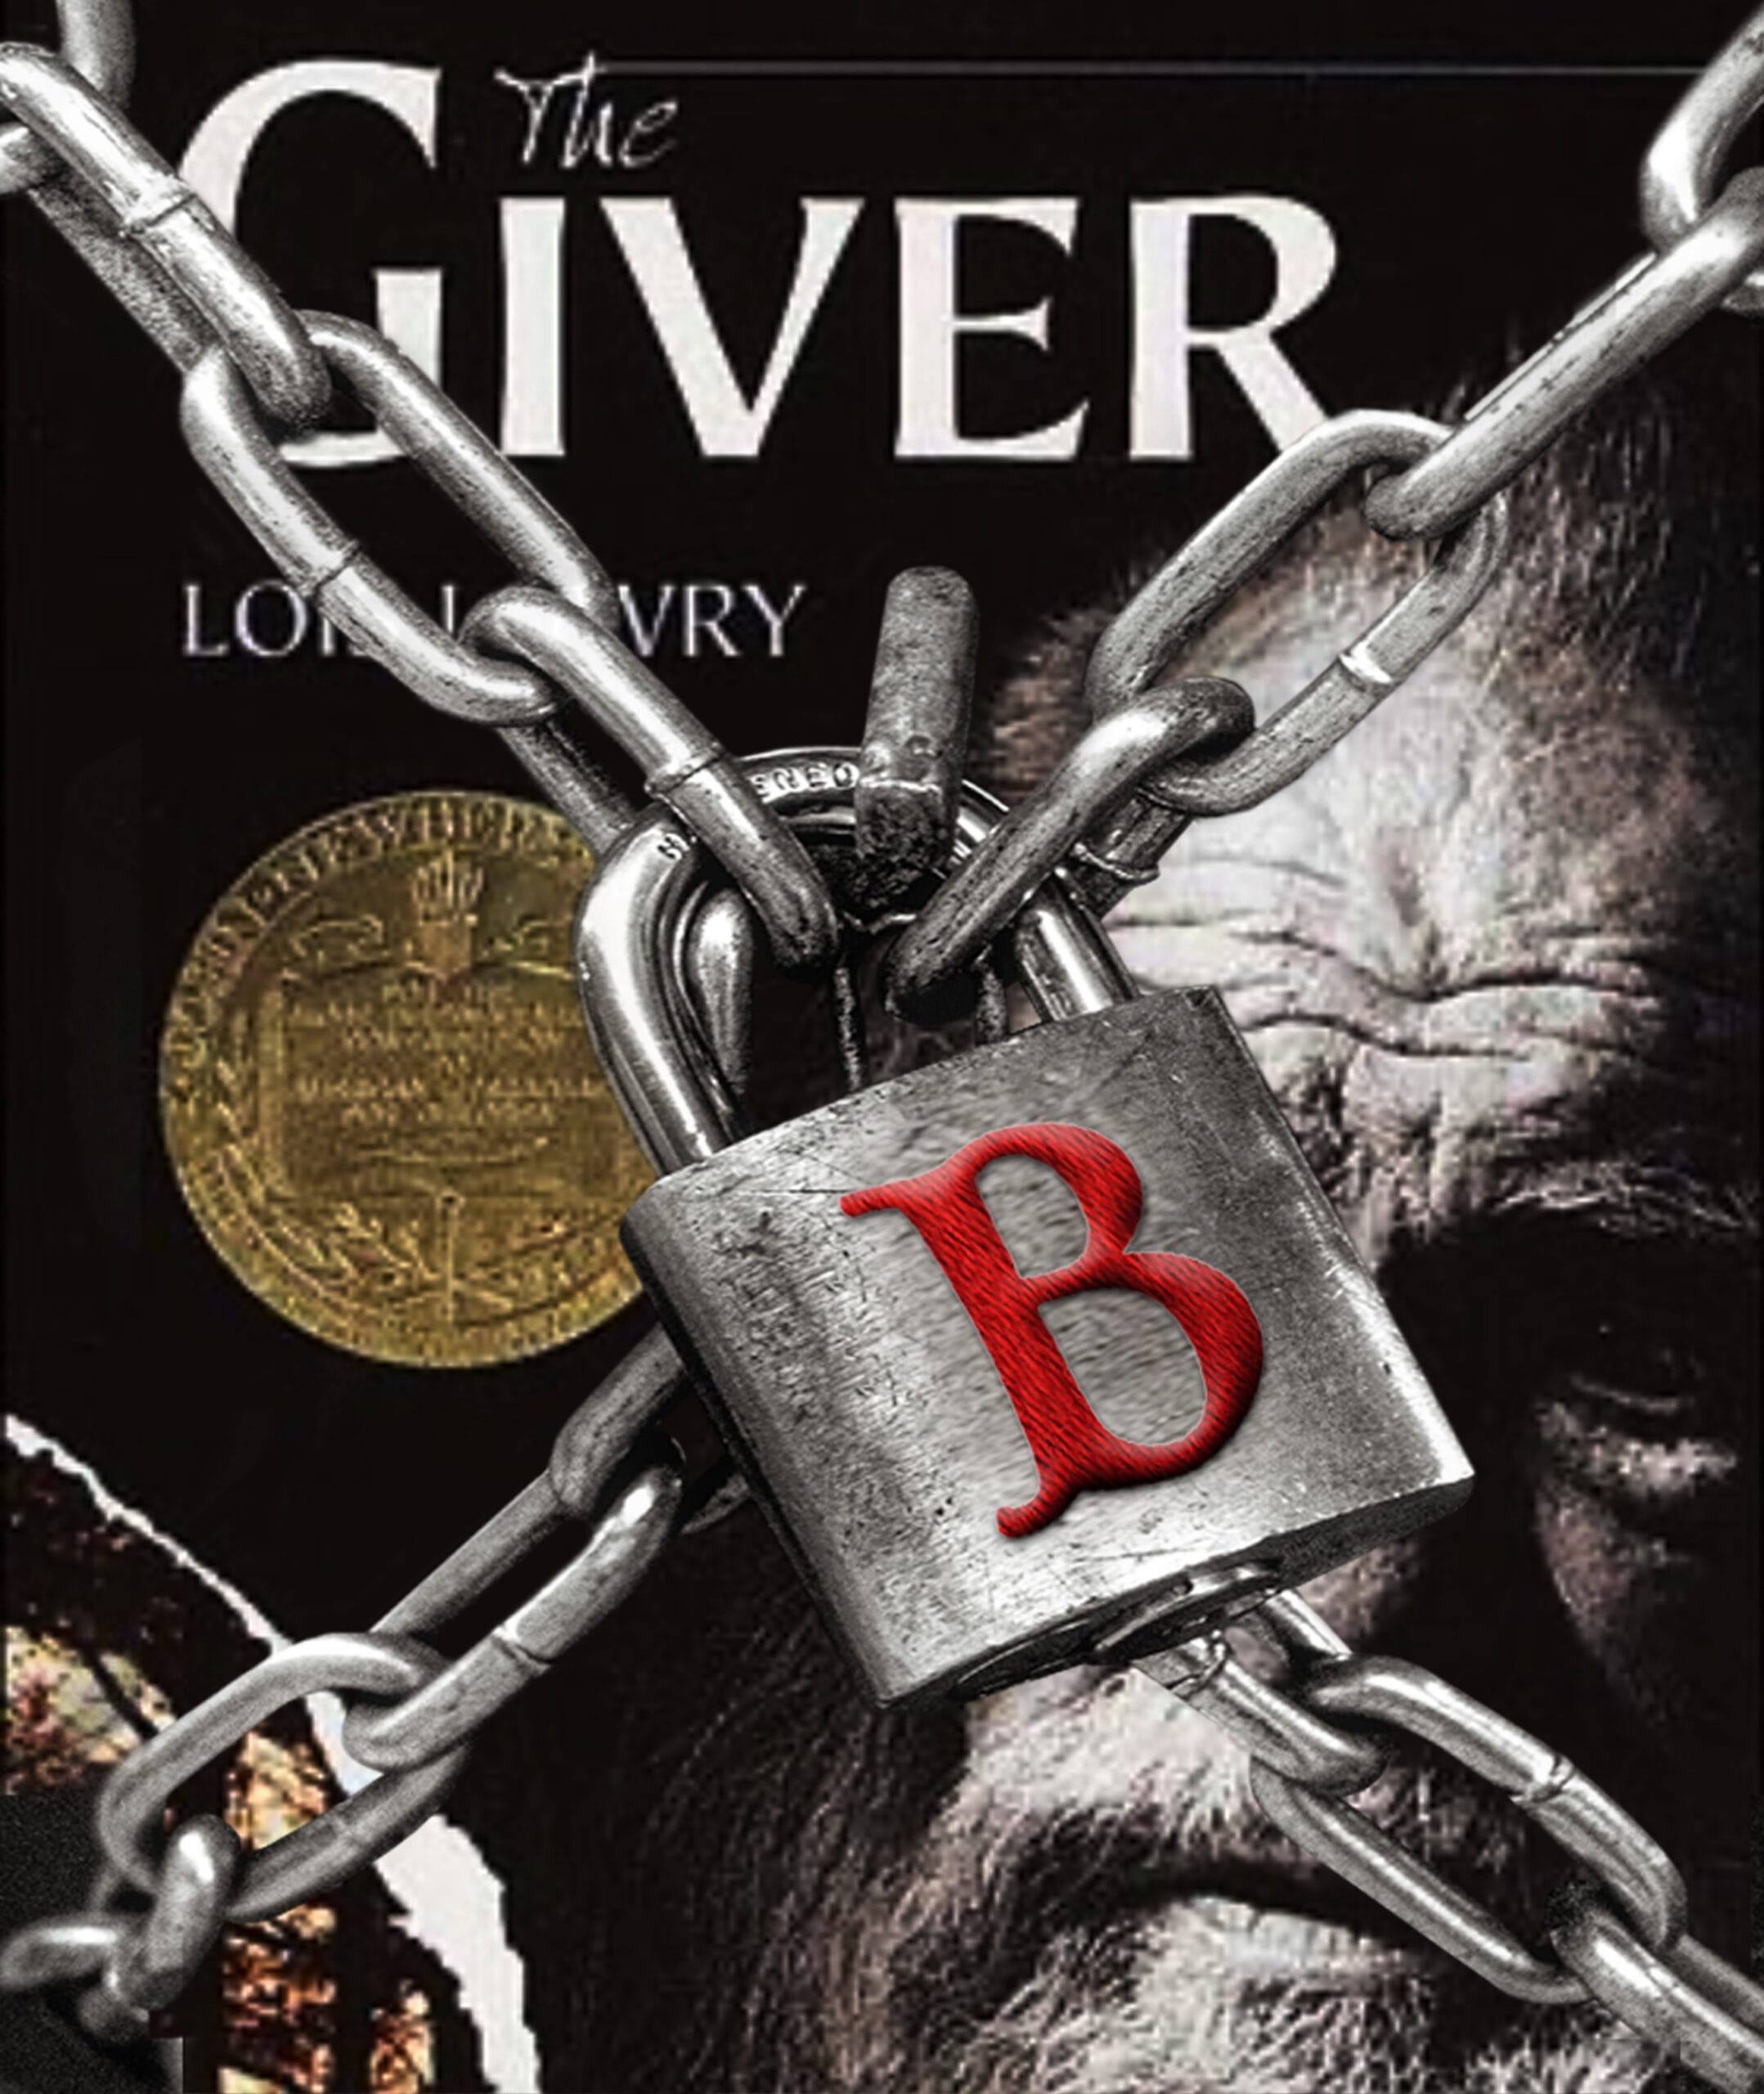 This Book is Banned_The Giver: A World Without Humanities